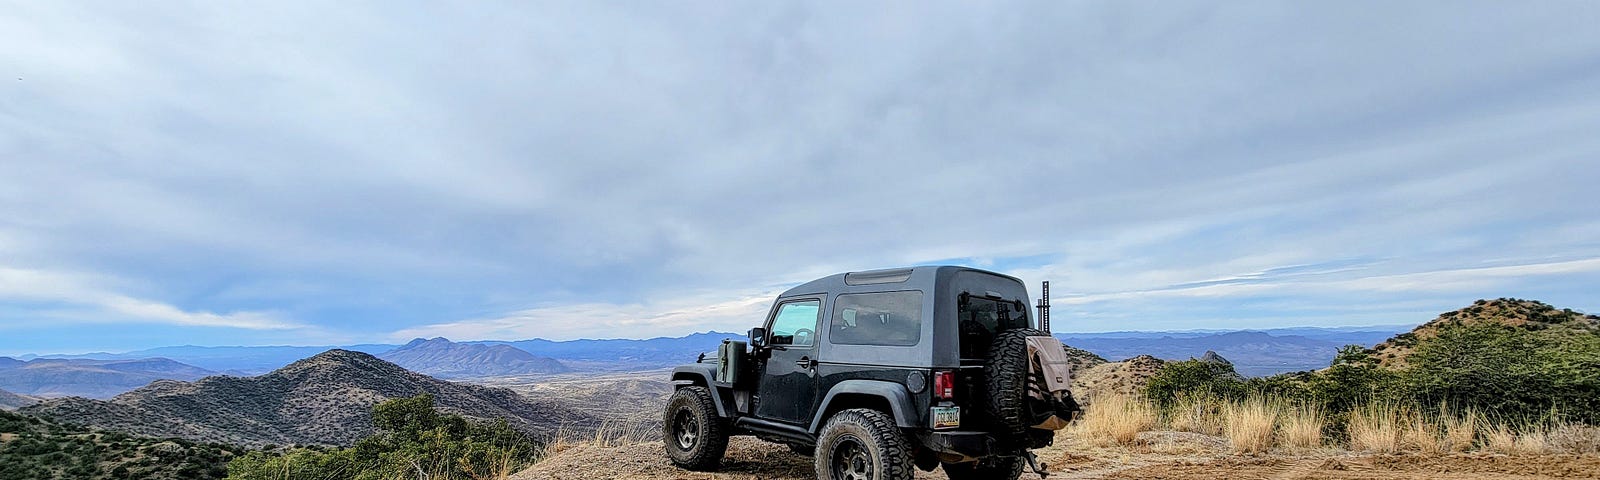 Black Jeep parked on a dirt road looking out over mountain ranges in southern Arizona